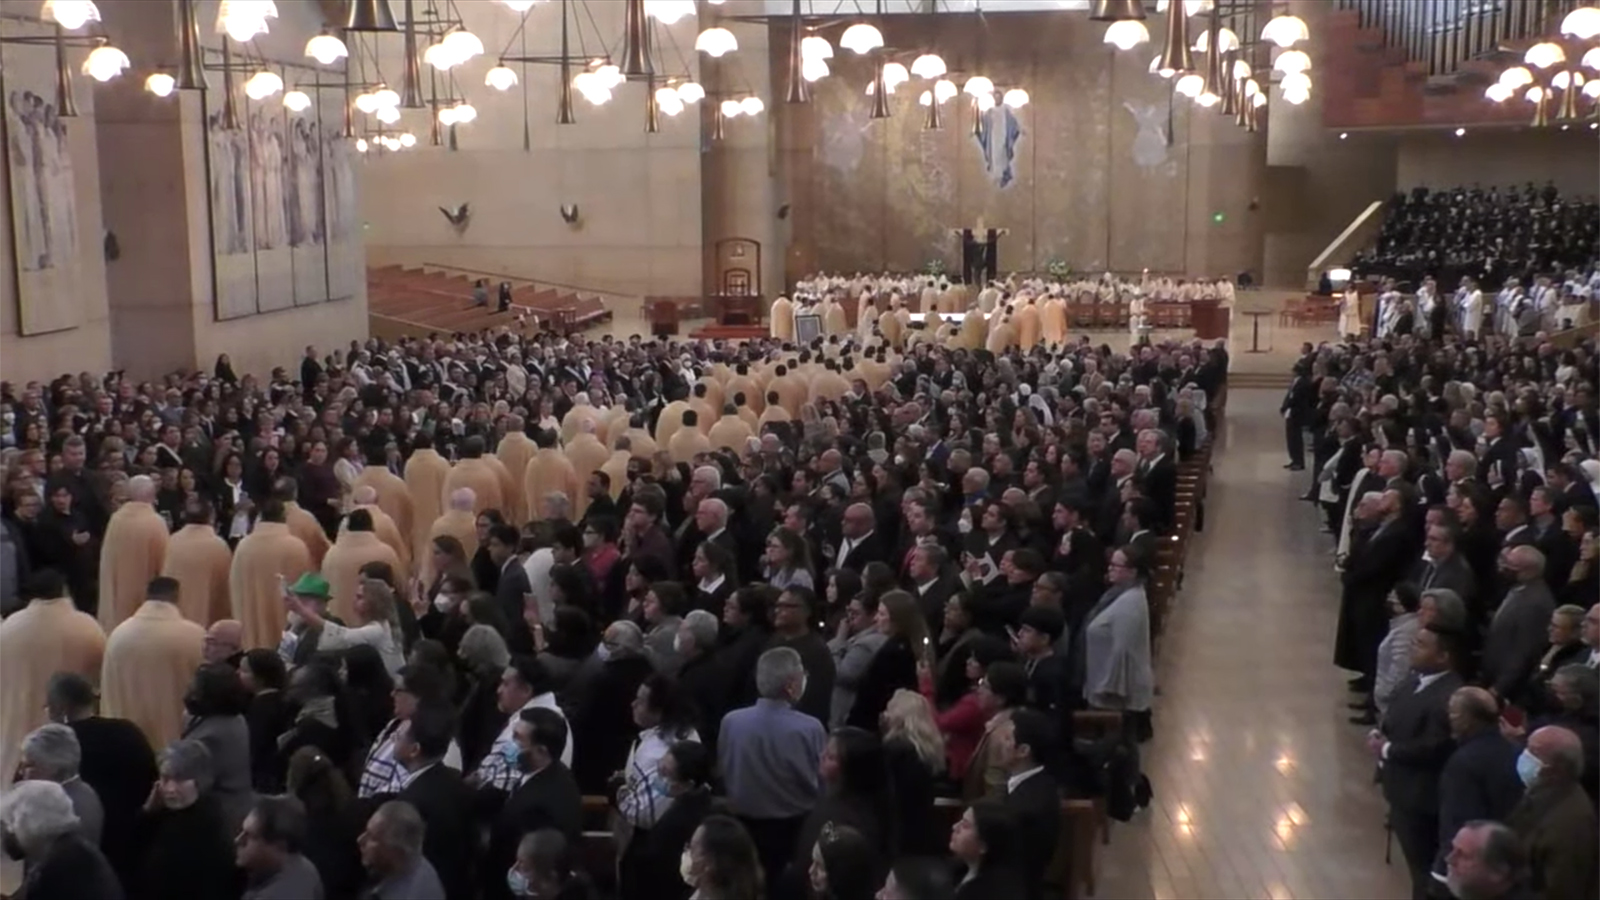 Clergy process into the Cathedral of Our Lady of the Angel at the start of the funeral Mass for Bishop David O'Connell on Friday, March 3, 2023, in Los Angeles. Video screen grab